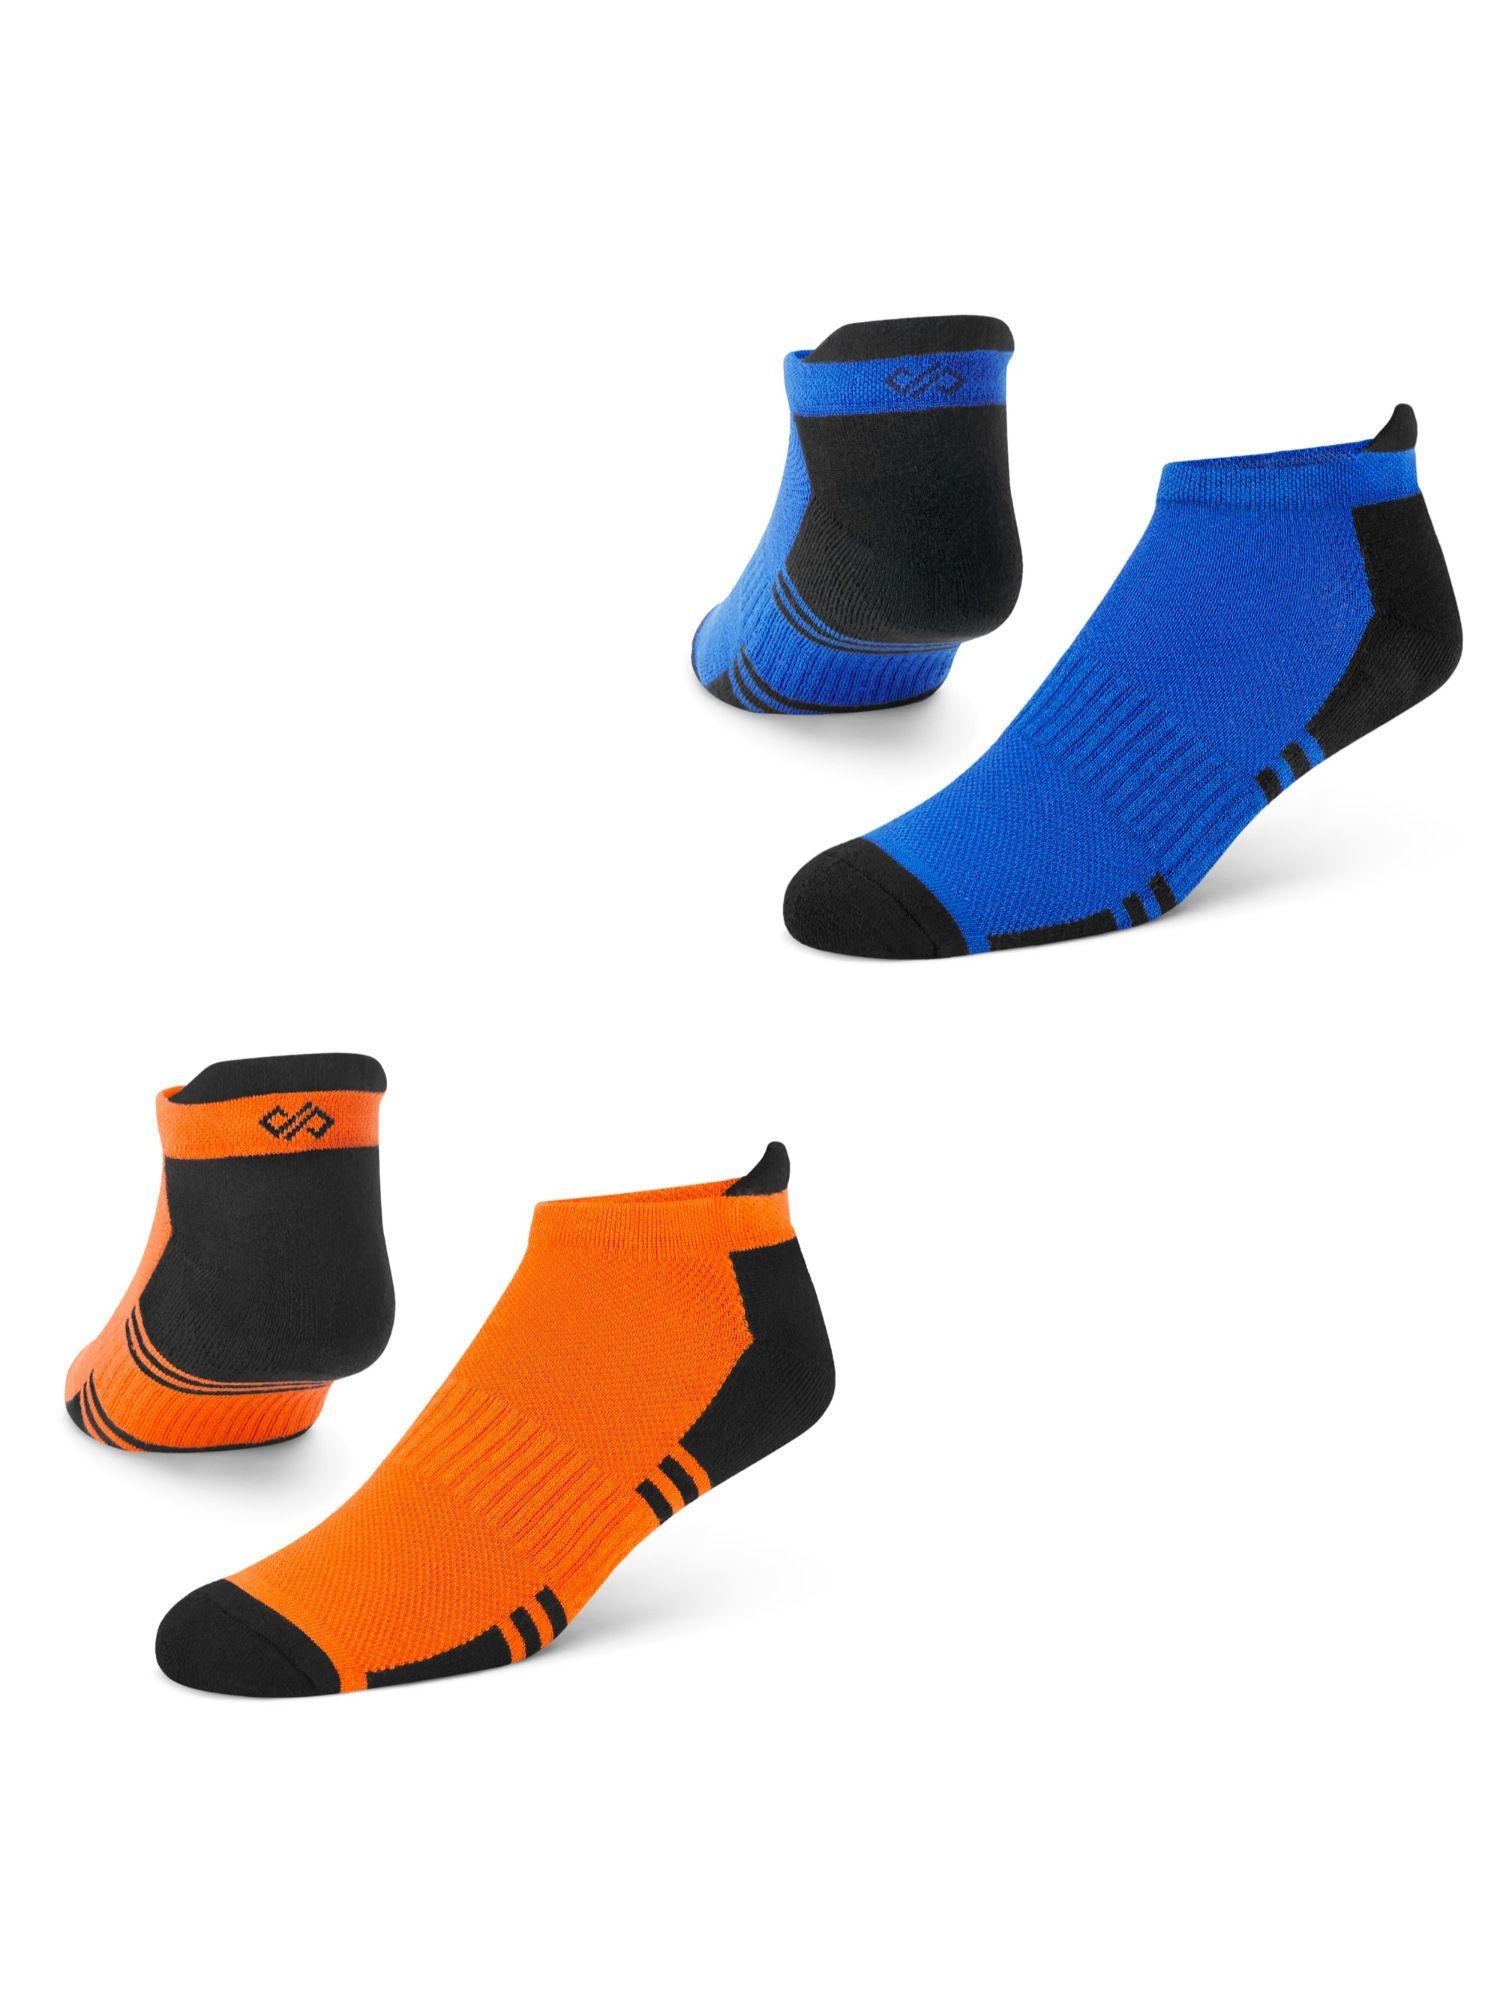 dual solid multicolor men bamboo ankle length socks - free size - pack of 2 pairs